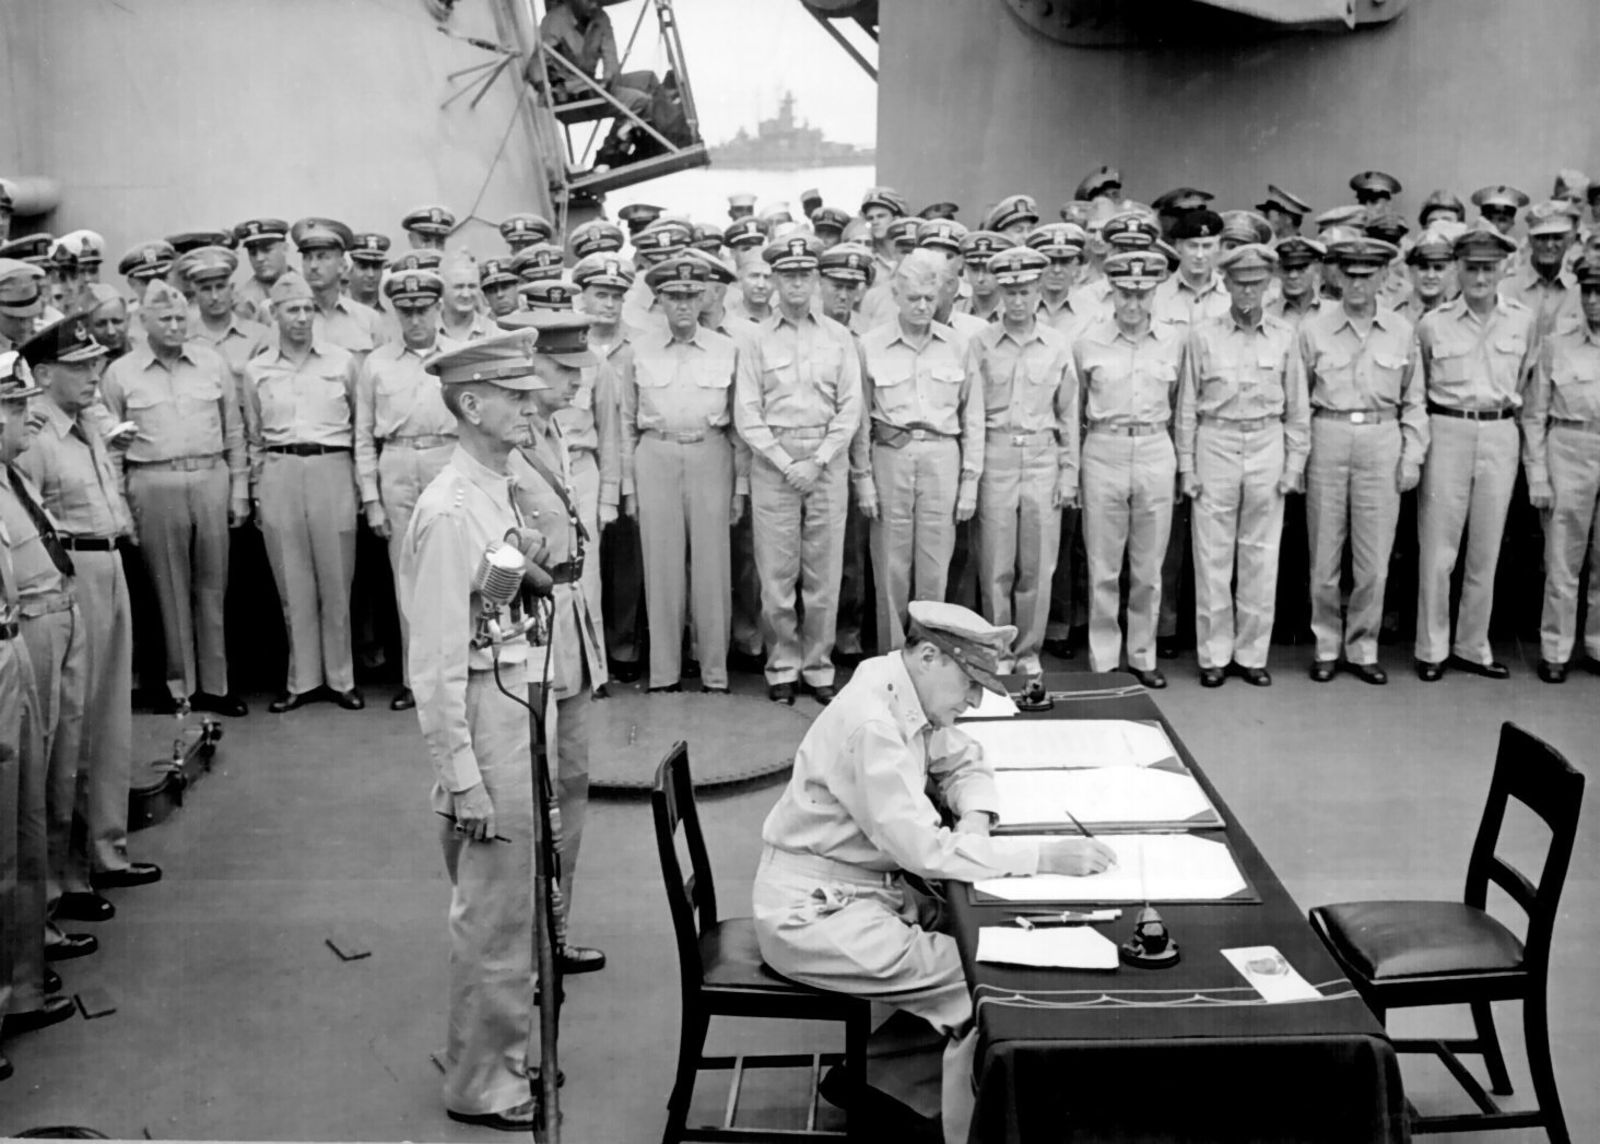 General of the Army Douglas MacArthur signs the Instrument of Surrender on behalf of the Allied Powers